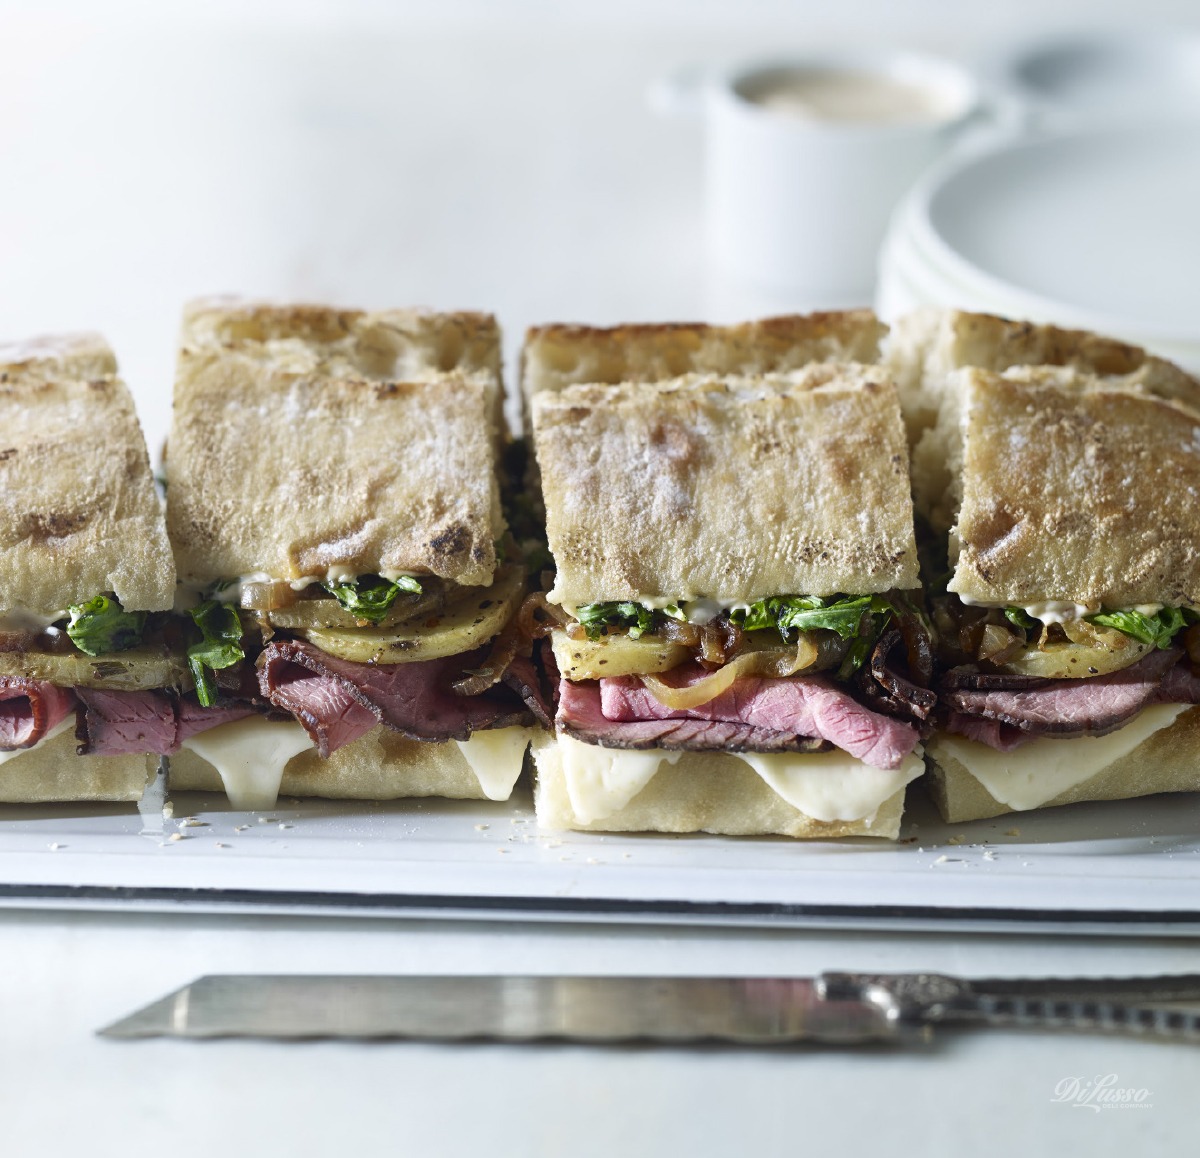 Di Lusso for Dinner: The Family-Size Sandwich